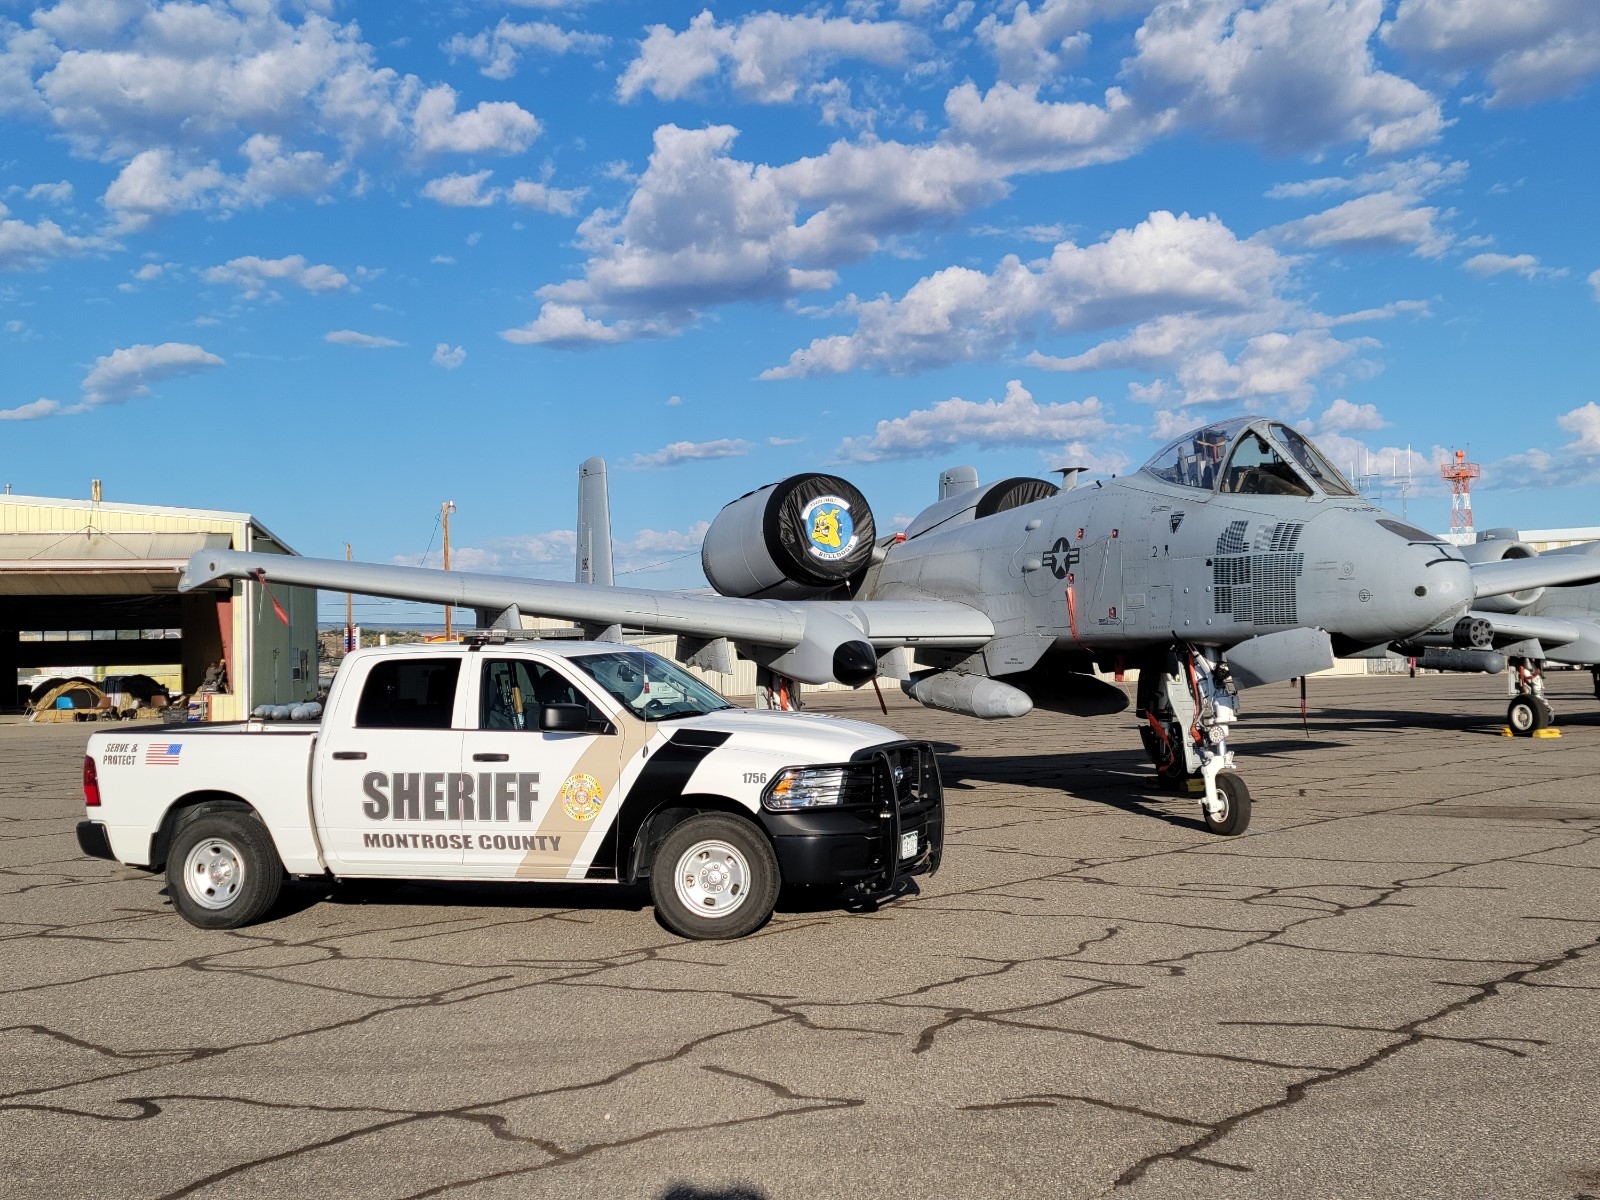 Deputy Vehicle with Jet at Event at Airport